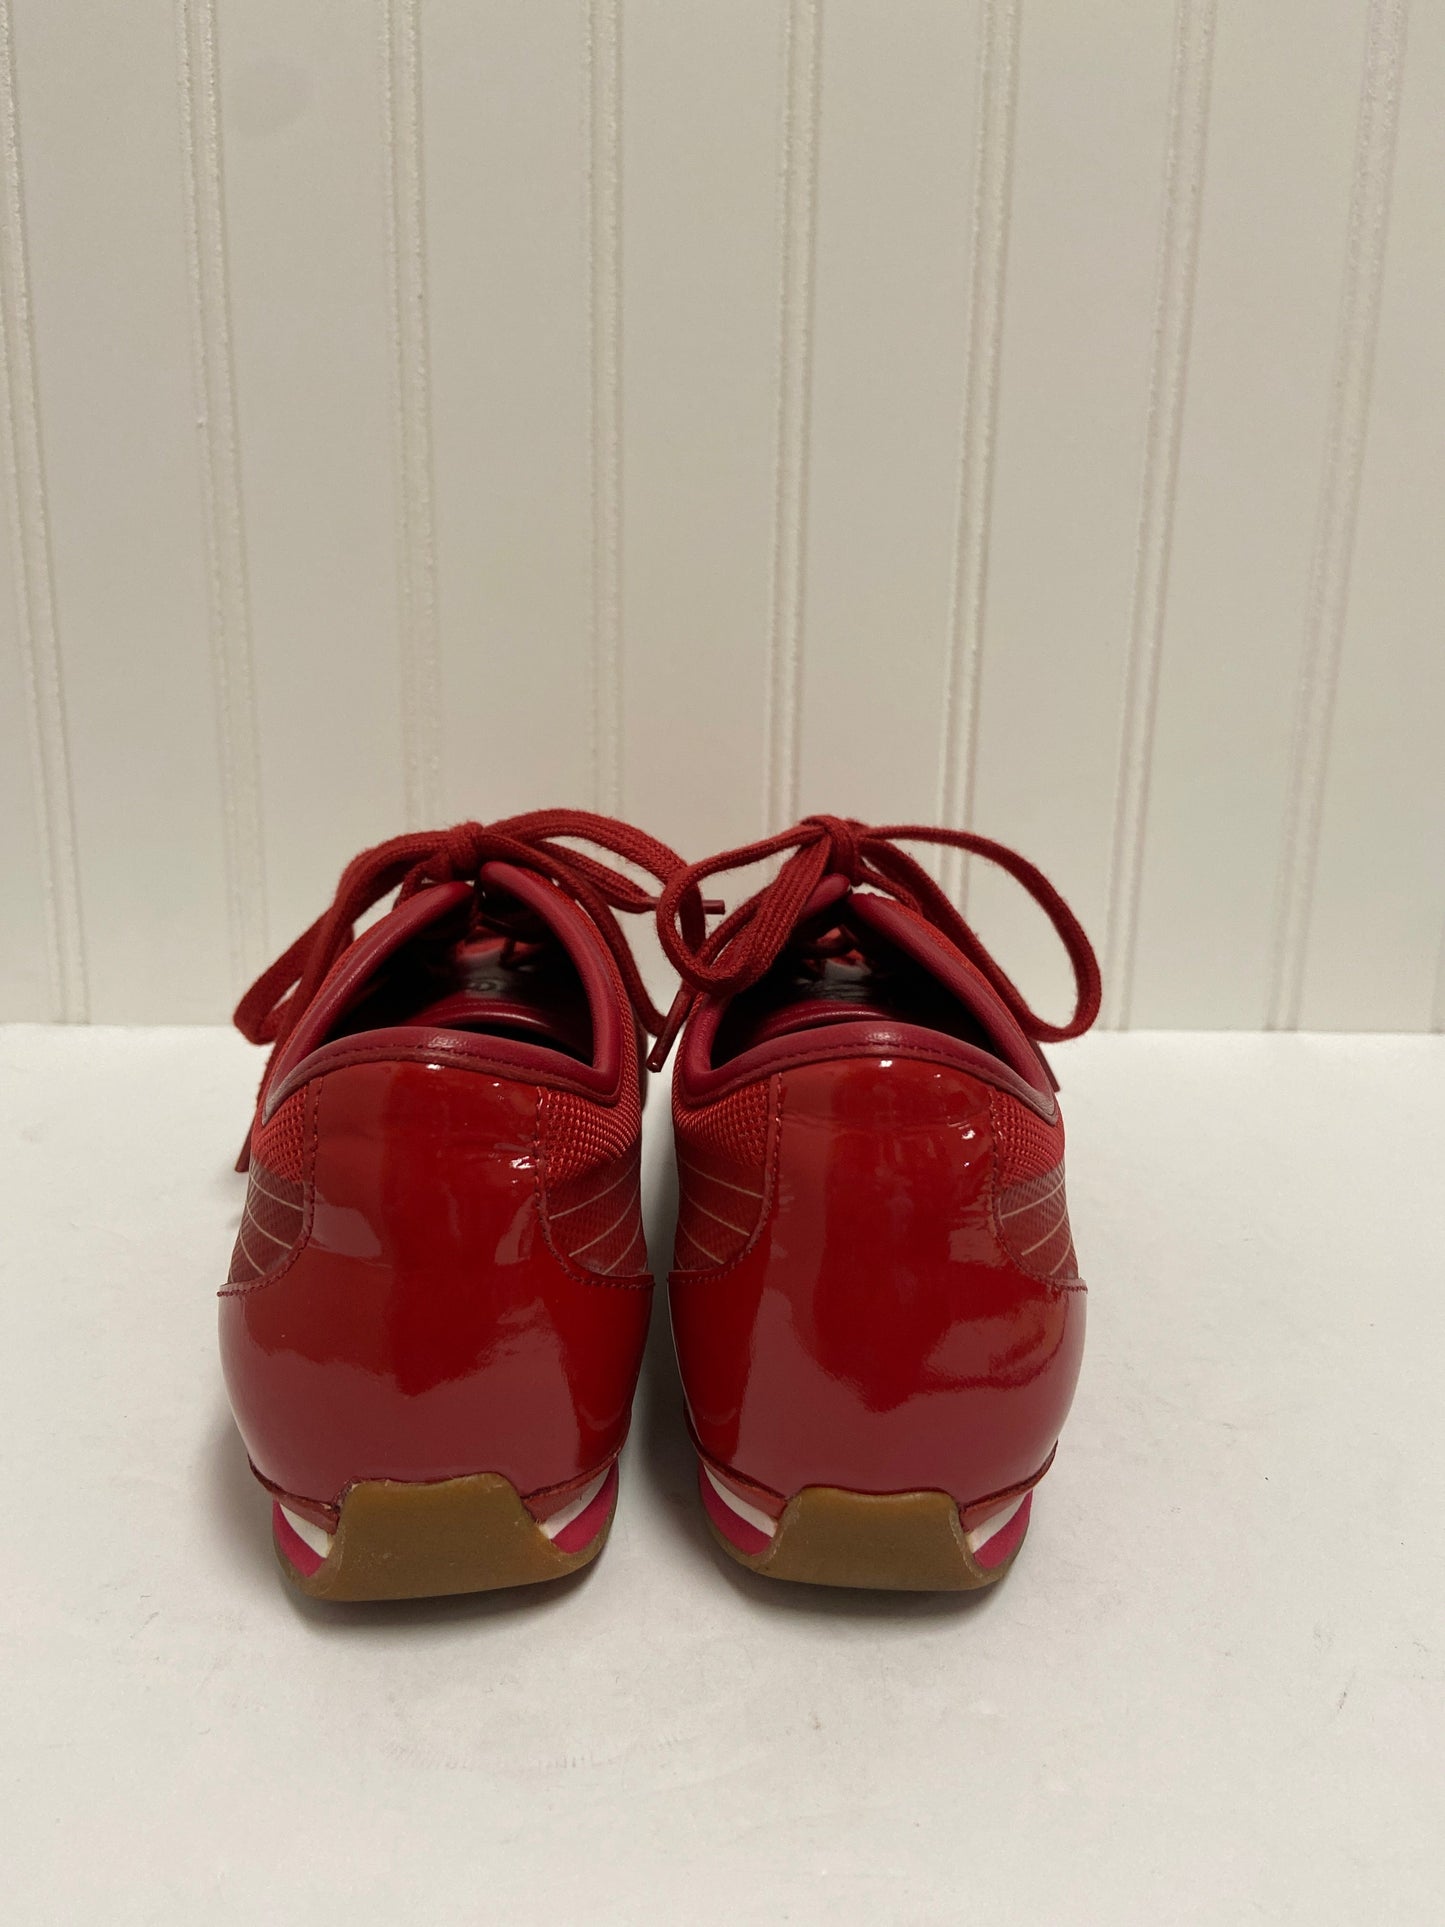 Shoes Designer By Cole-haan  Size: 6